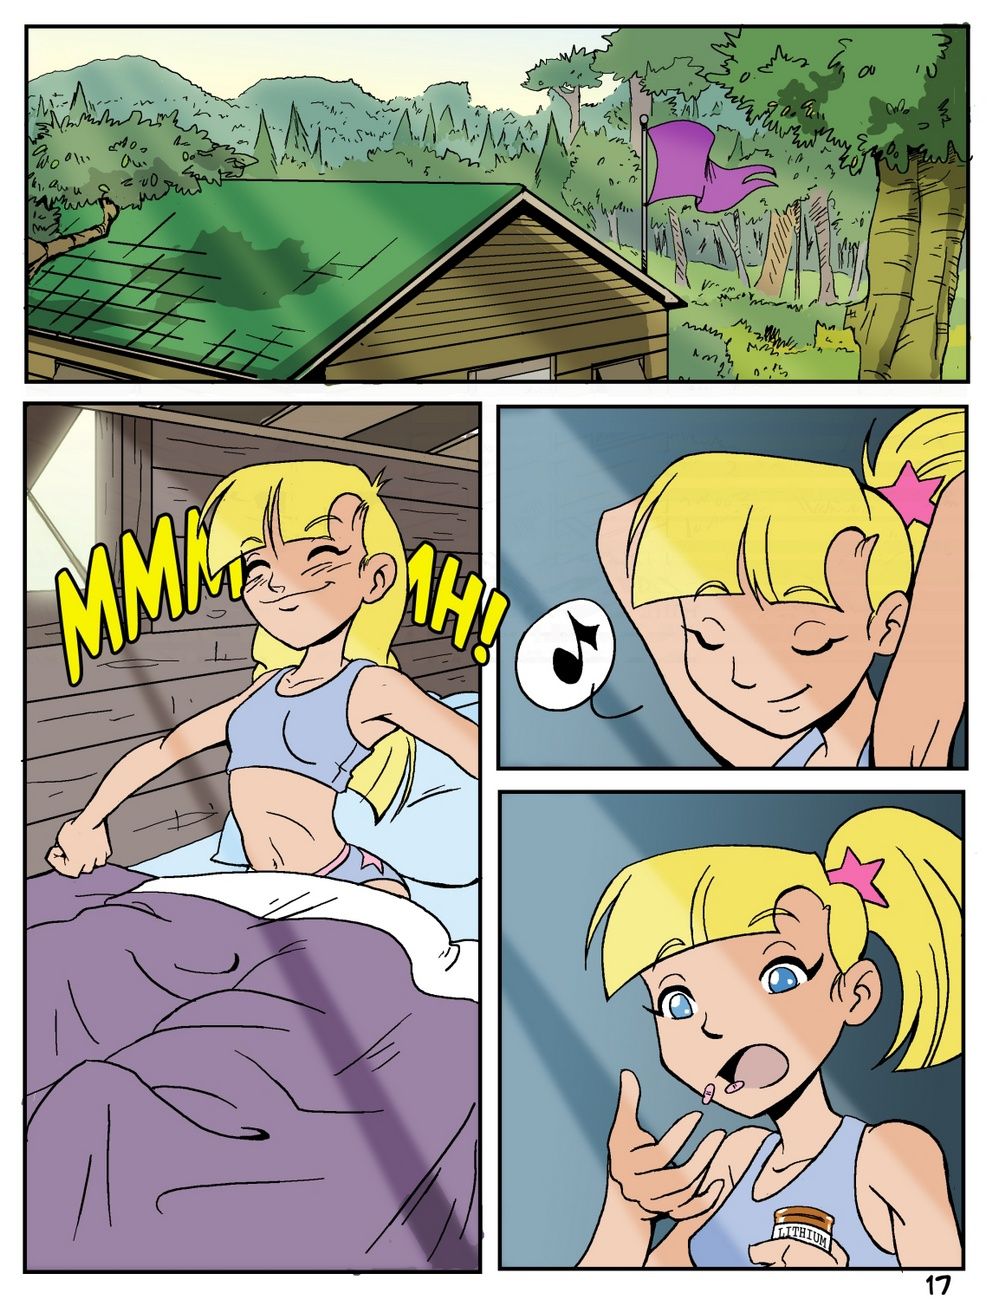 Camp Sherwood [Mr.D] (Ongoing) page 18